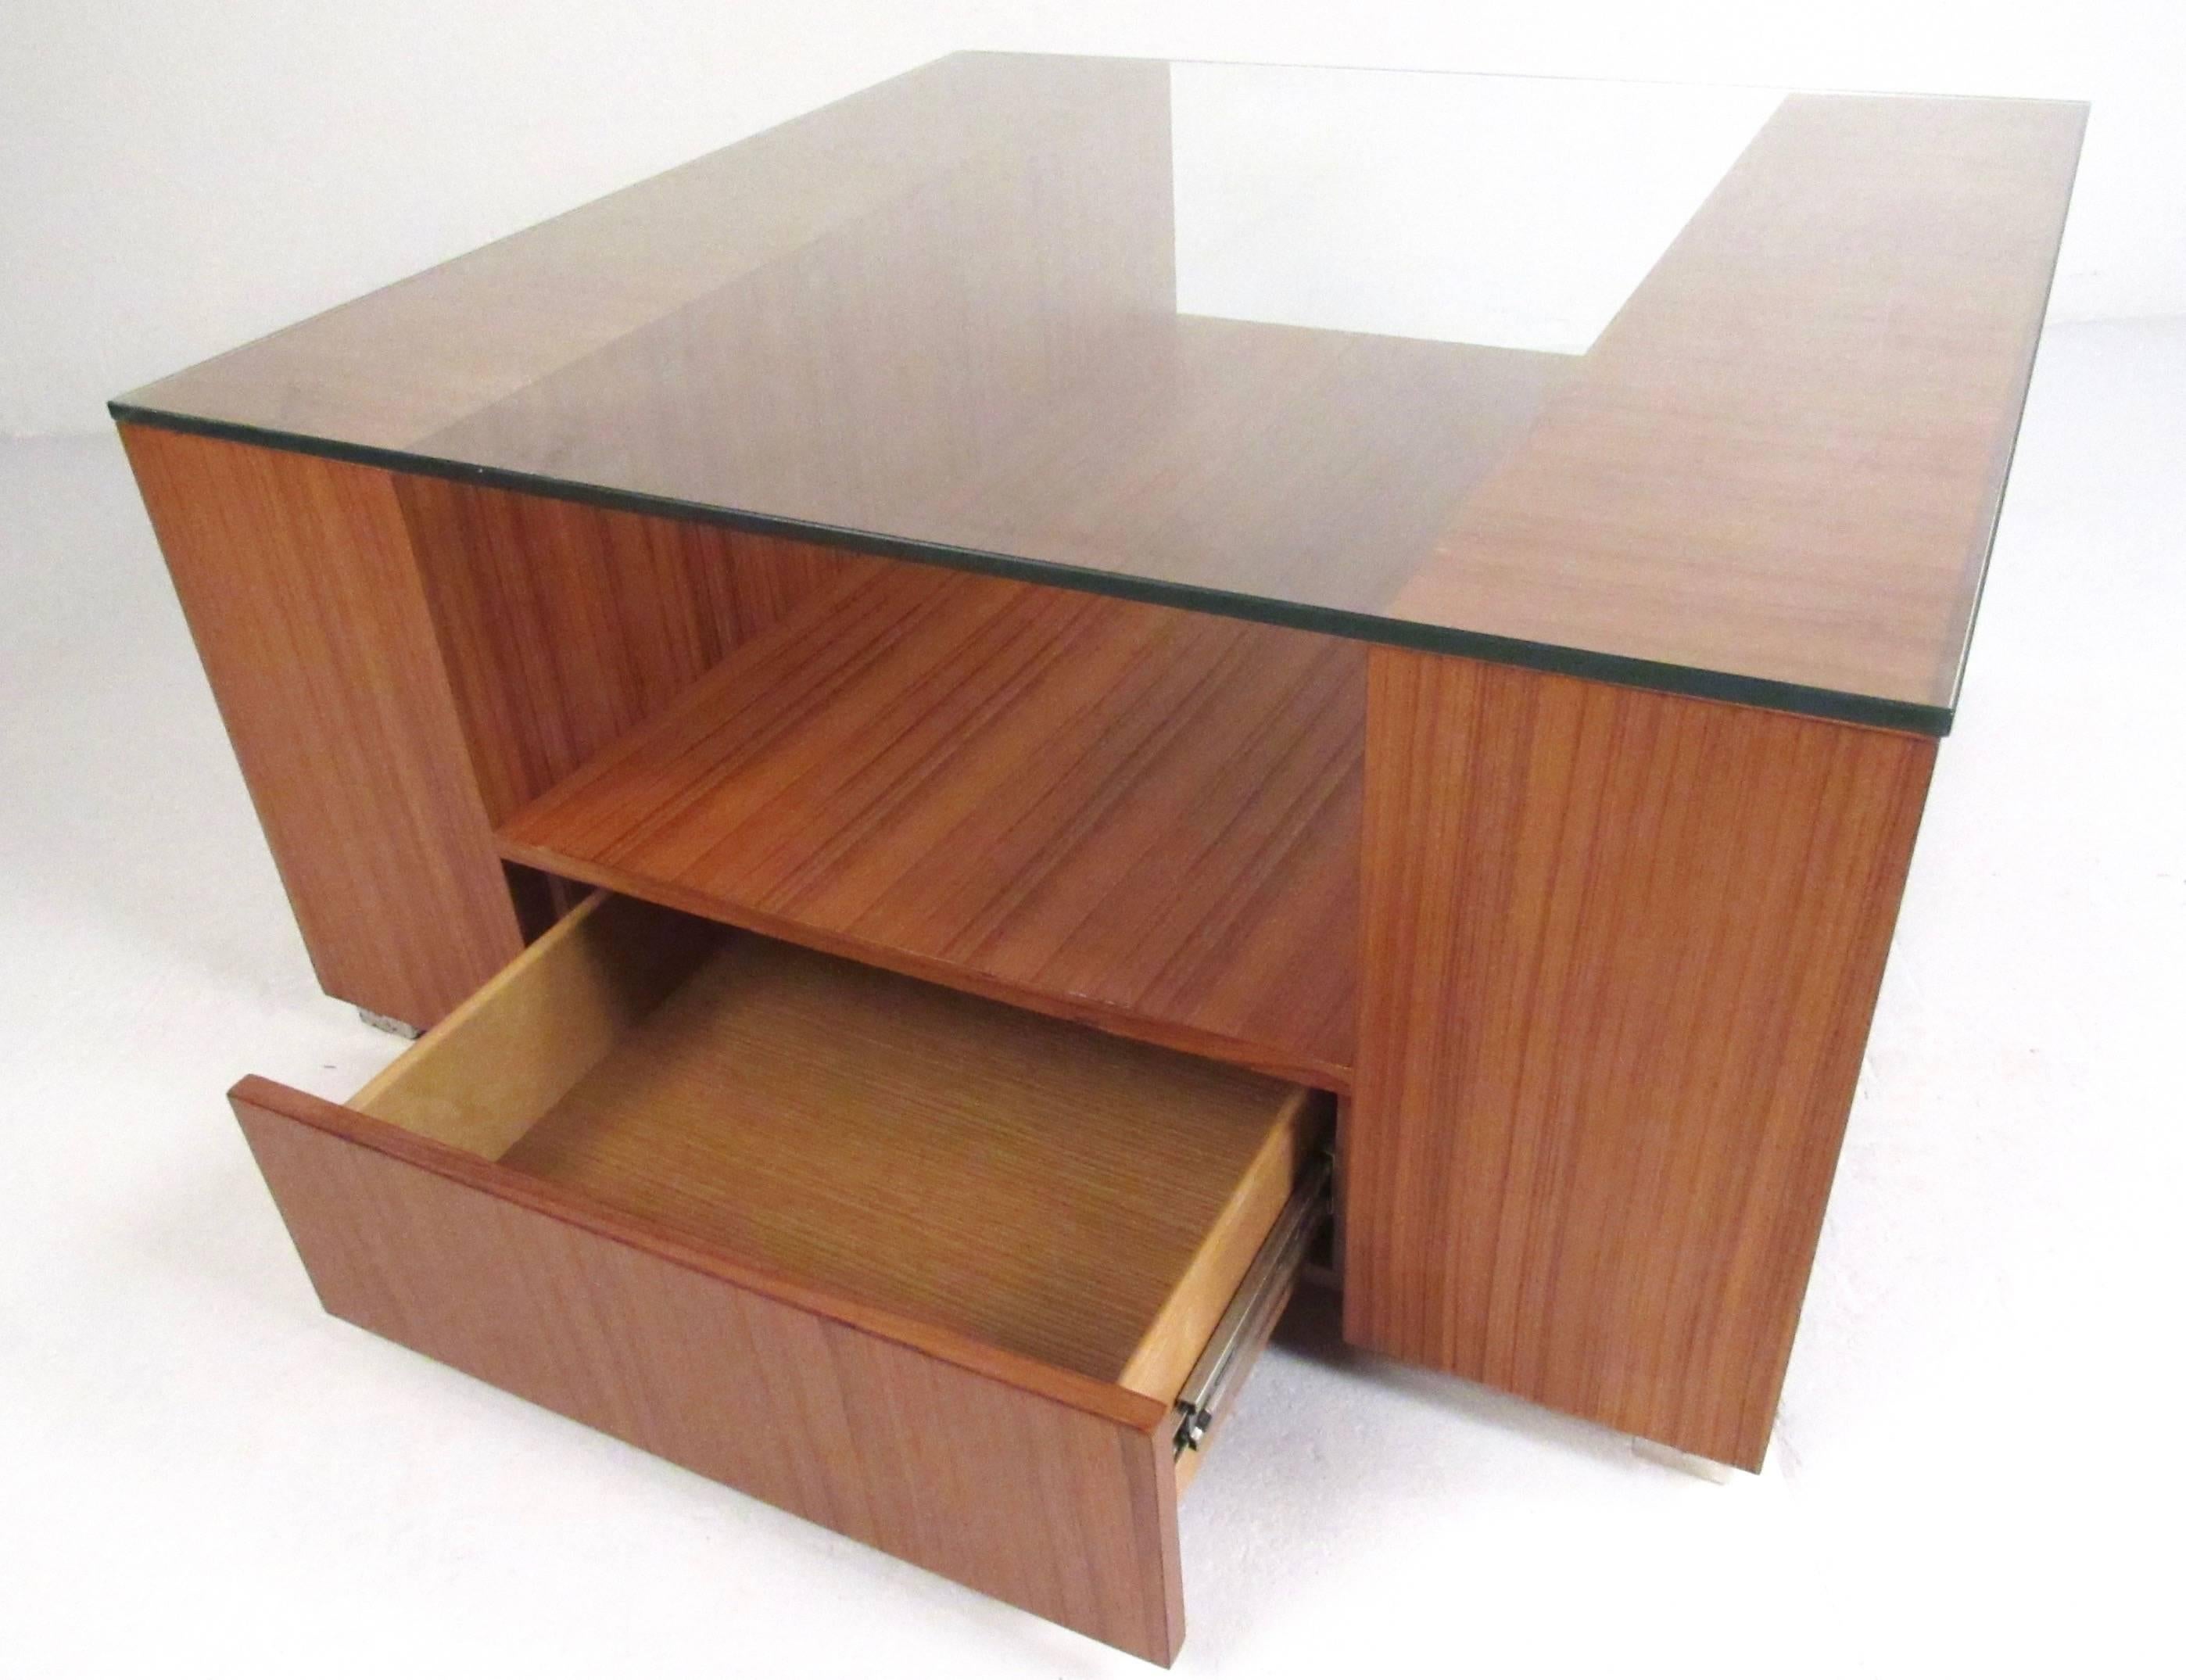 This vintage modern teak coffee table features a stylish two-tier design, a pair of drawers for extra storage and thick glass top. Beautiful Scandinavian Modern table for any modern interior, please confirm item location (NY or NJ).